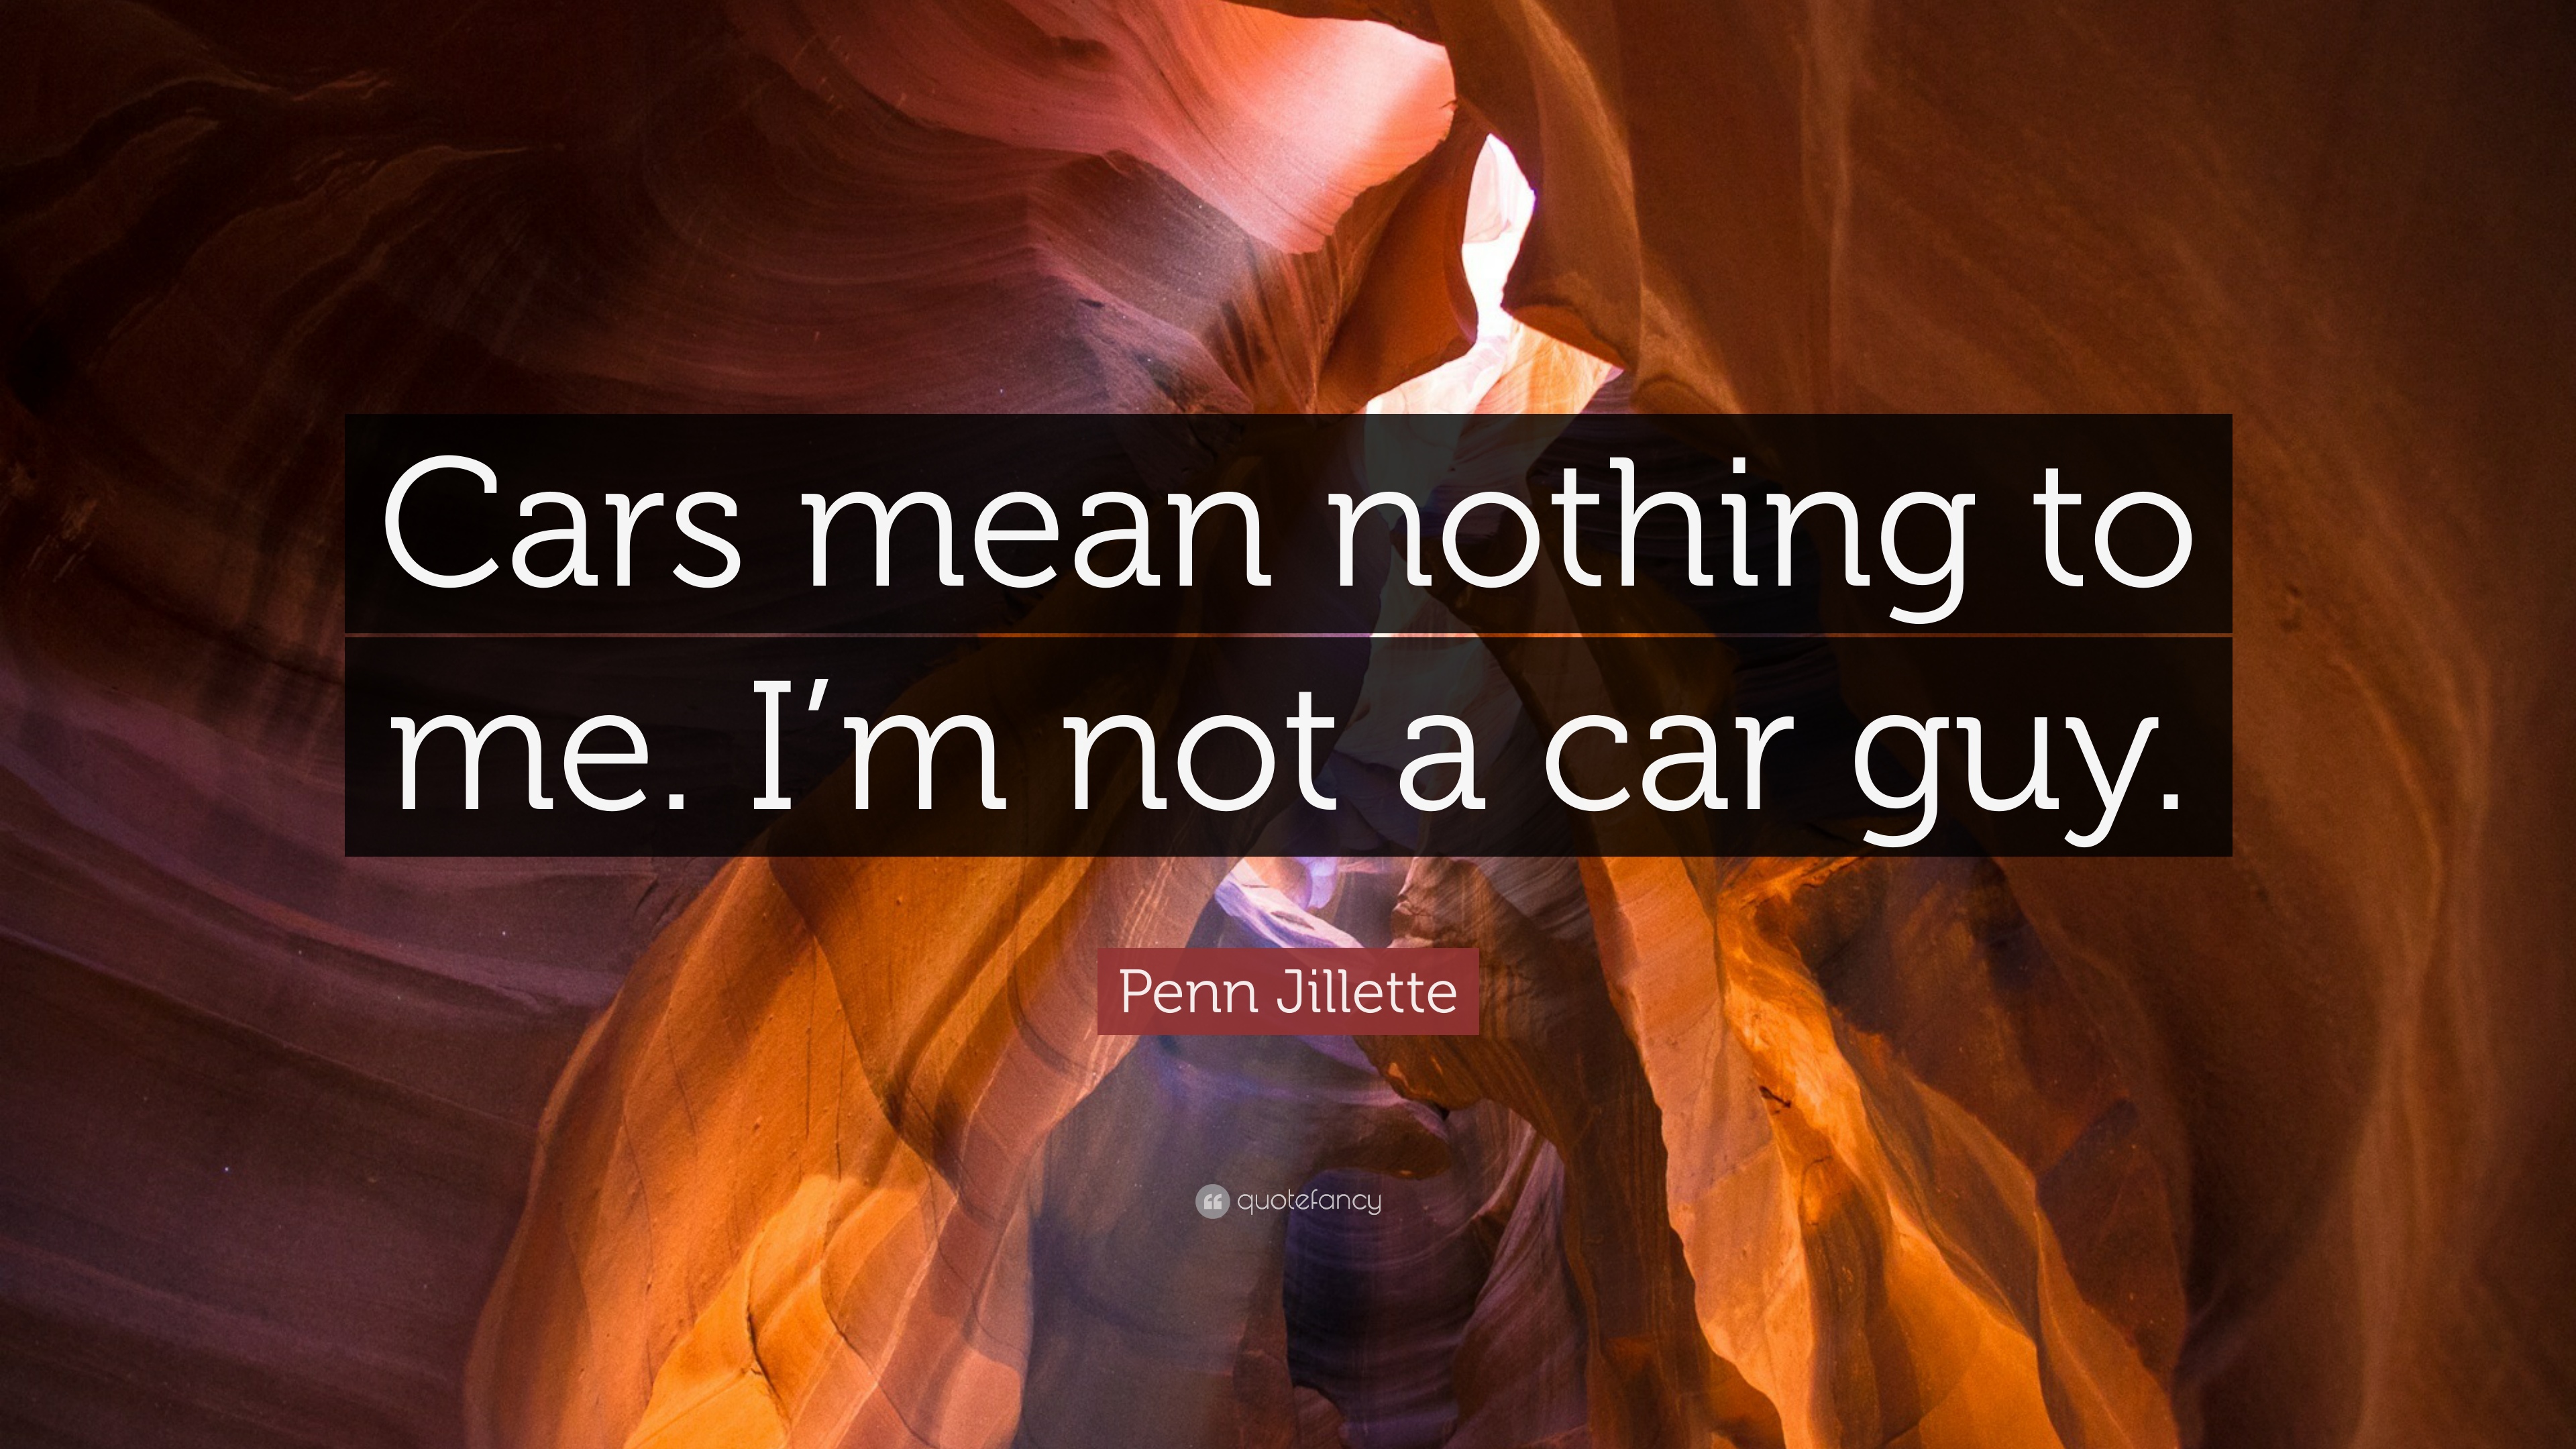 Penn Jillette Quote: "Cars mean nothing to me. 